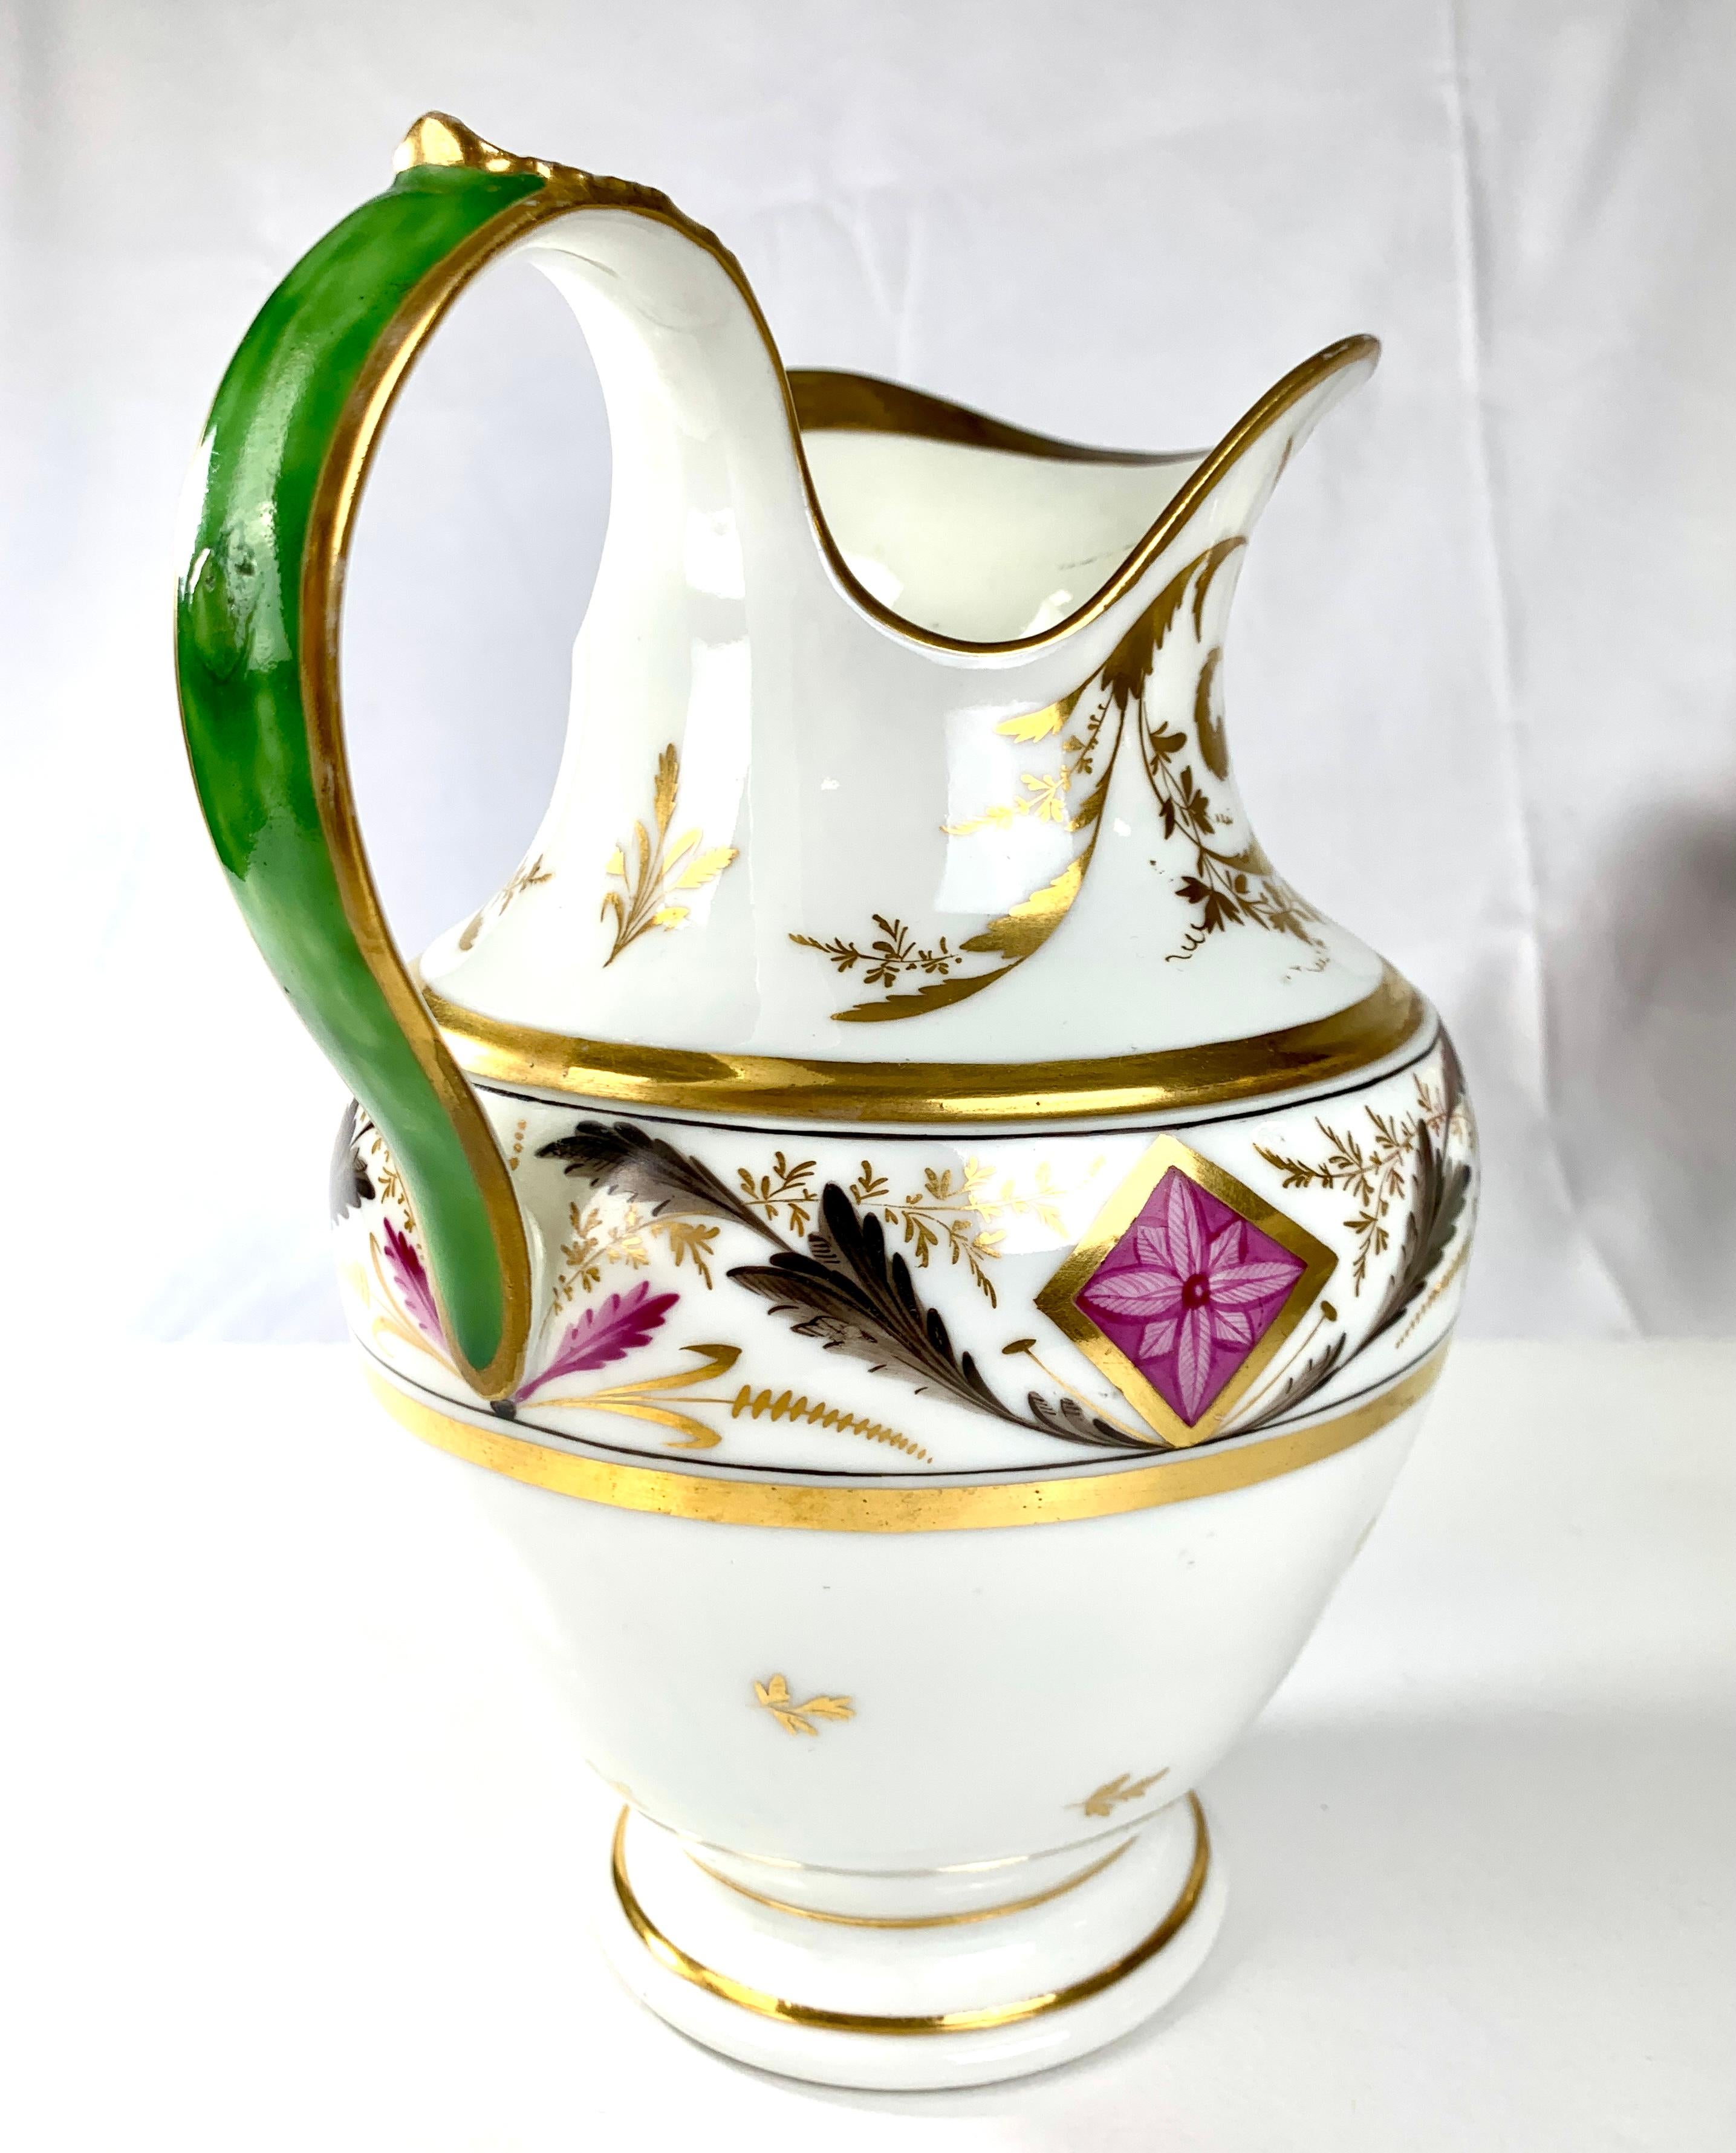 Antique French Porcelain Pitcher Hand Painted Empire Period, Circa 1815 For Sale 1